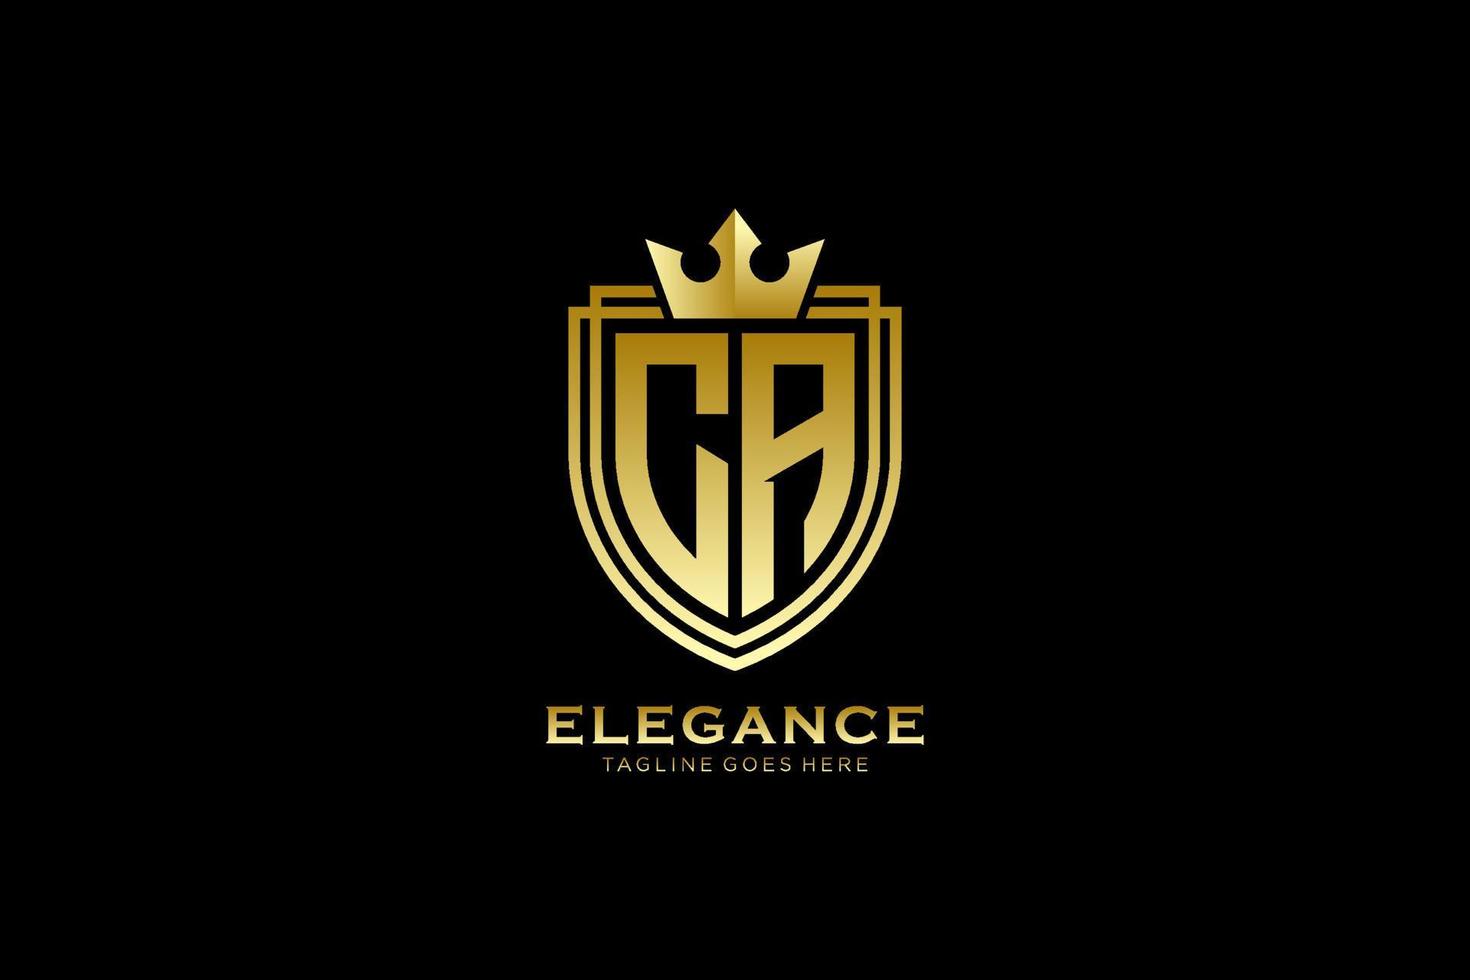 initial CA elegant luxury monogram logo or badge template with scrolls and royal crown - perfect for luxurious branding projects vector